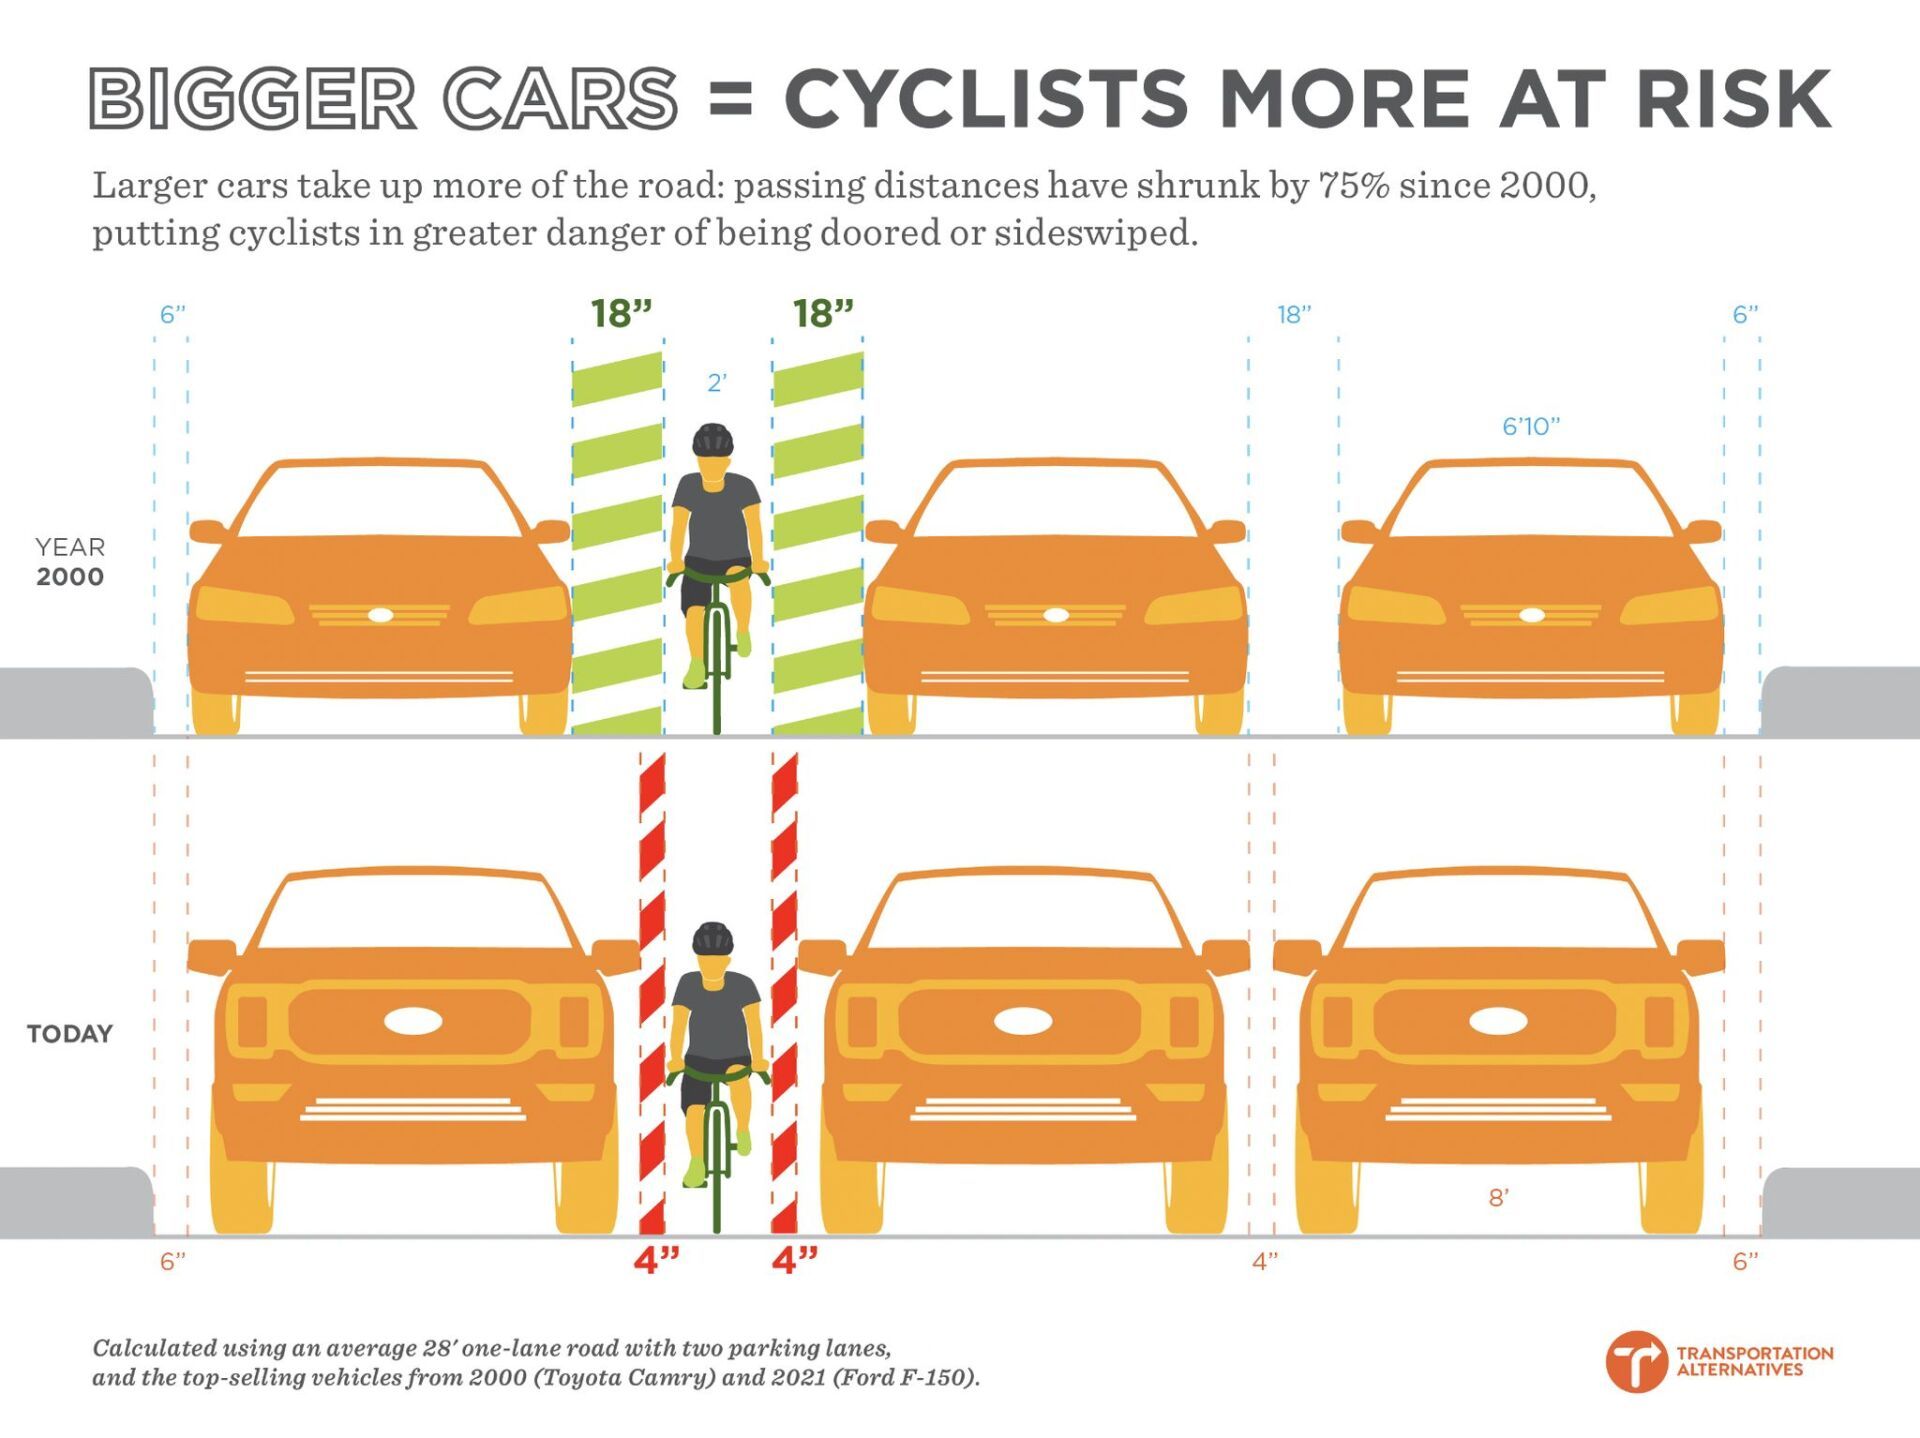 image depicting shrinking bike lanes with larger vehicles taking up more road space